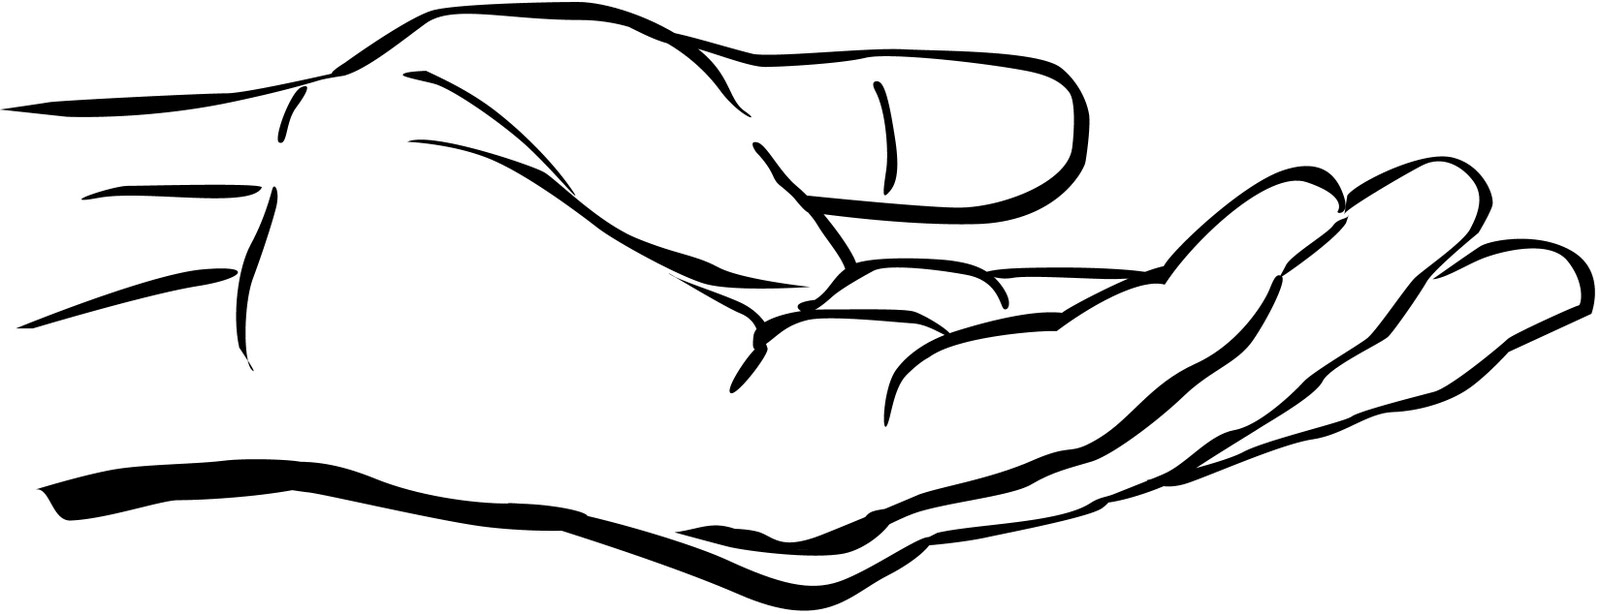 Two Hands Clipart Black And White | Clipart library - Free Clipart 